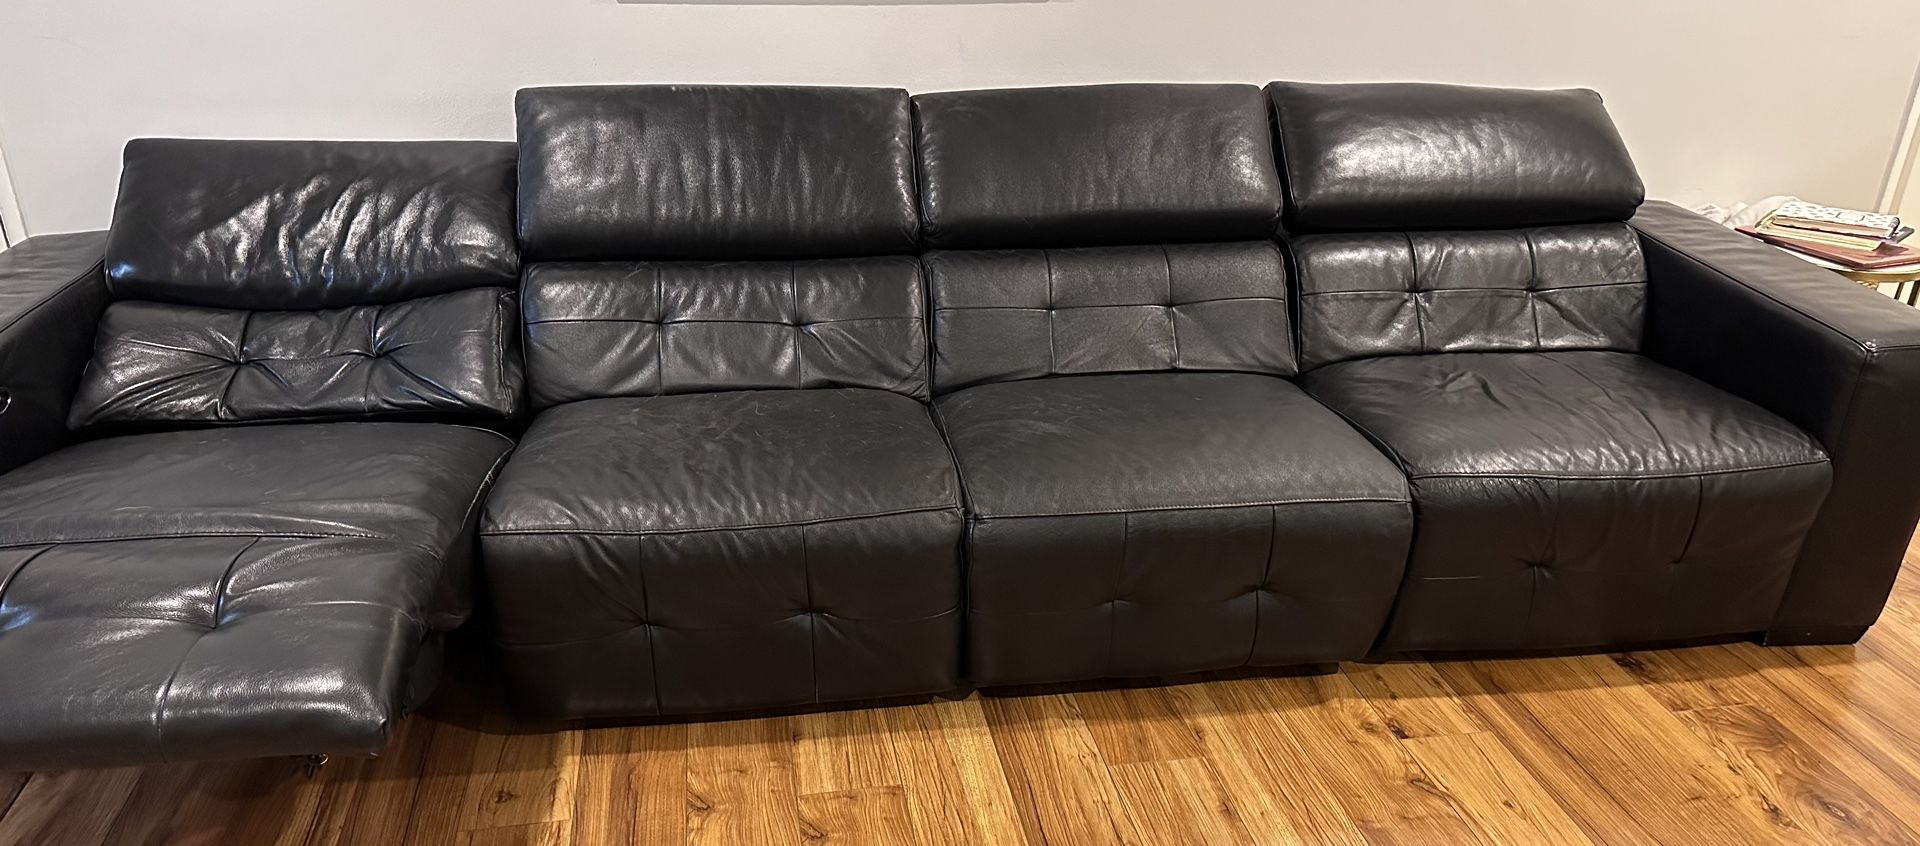 LEATHER COUCH / GREAT CONDITION 